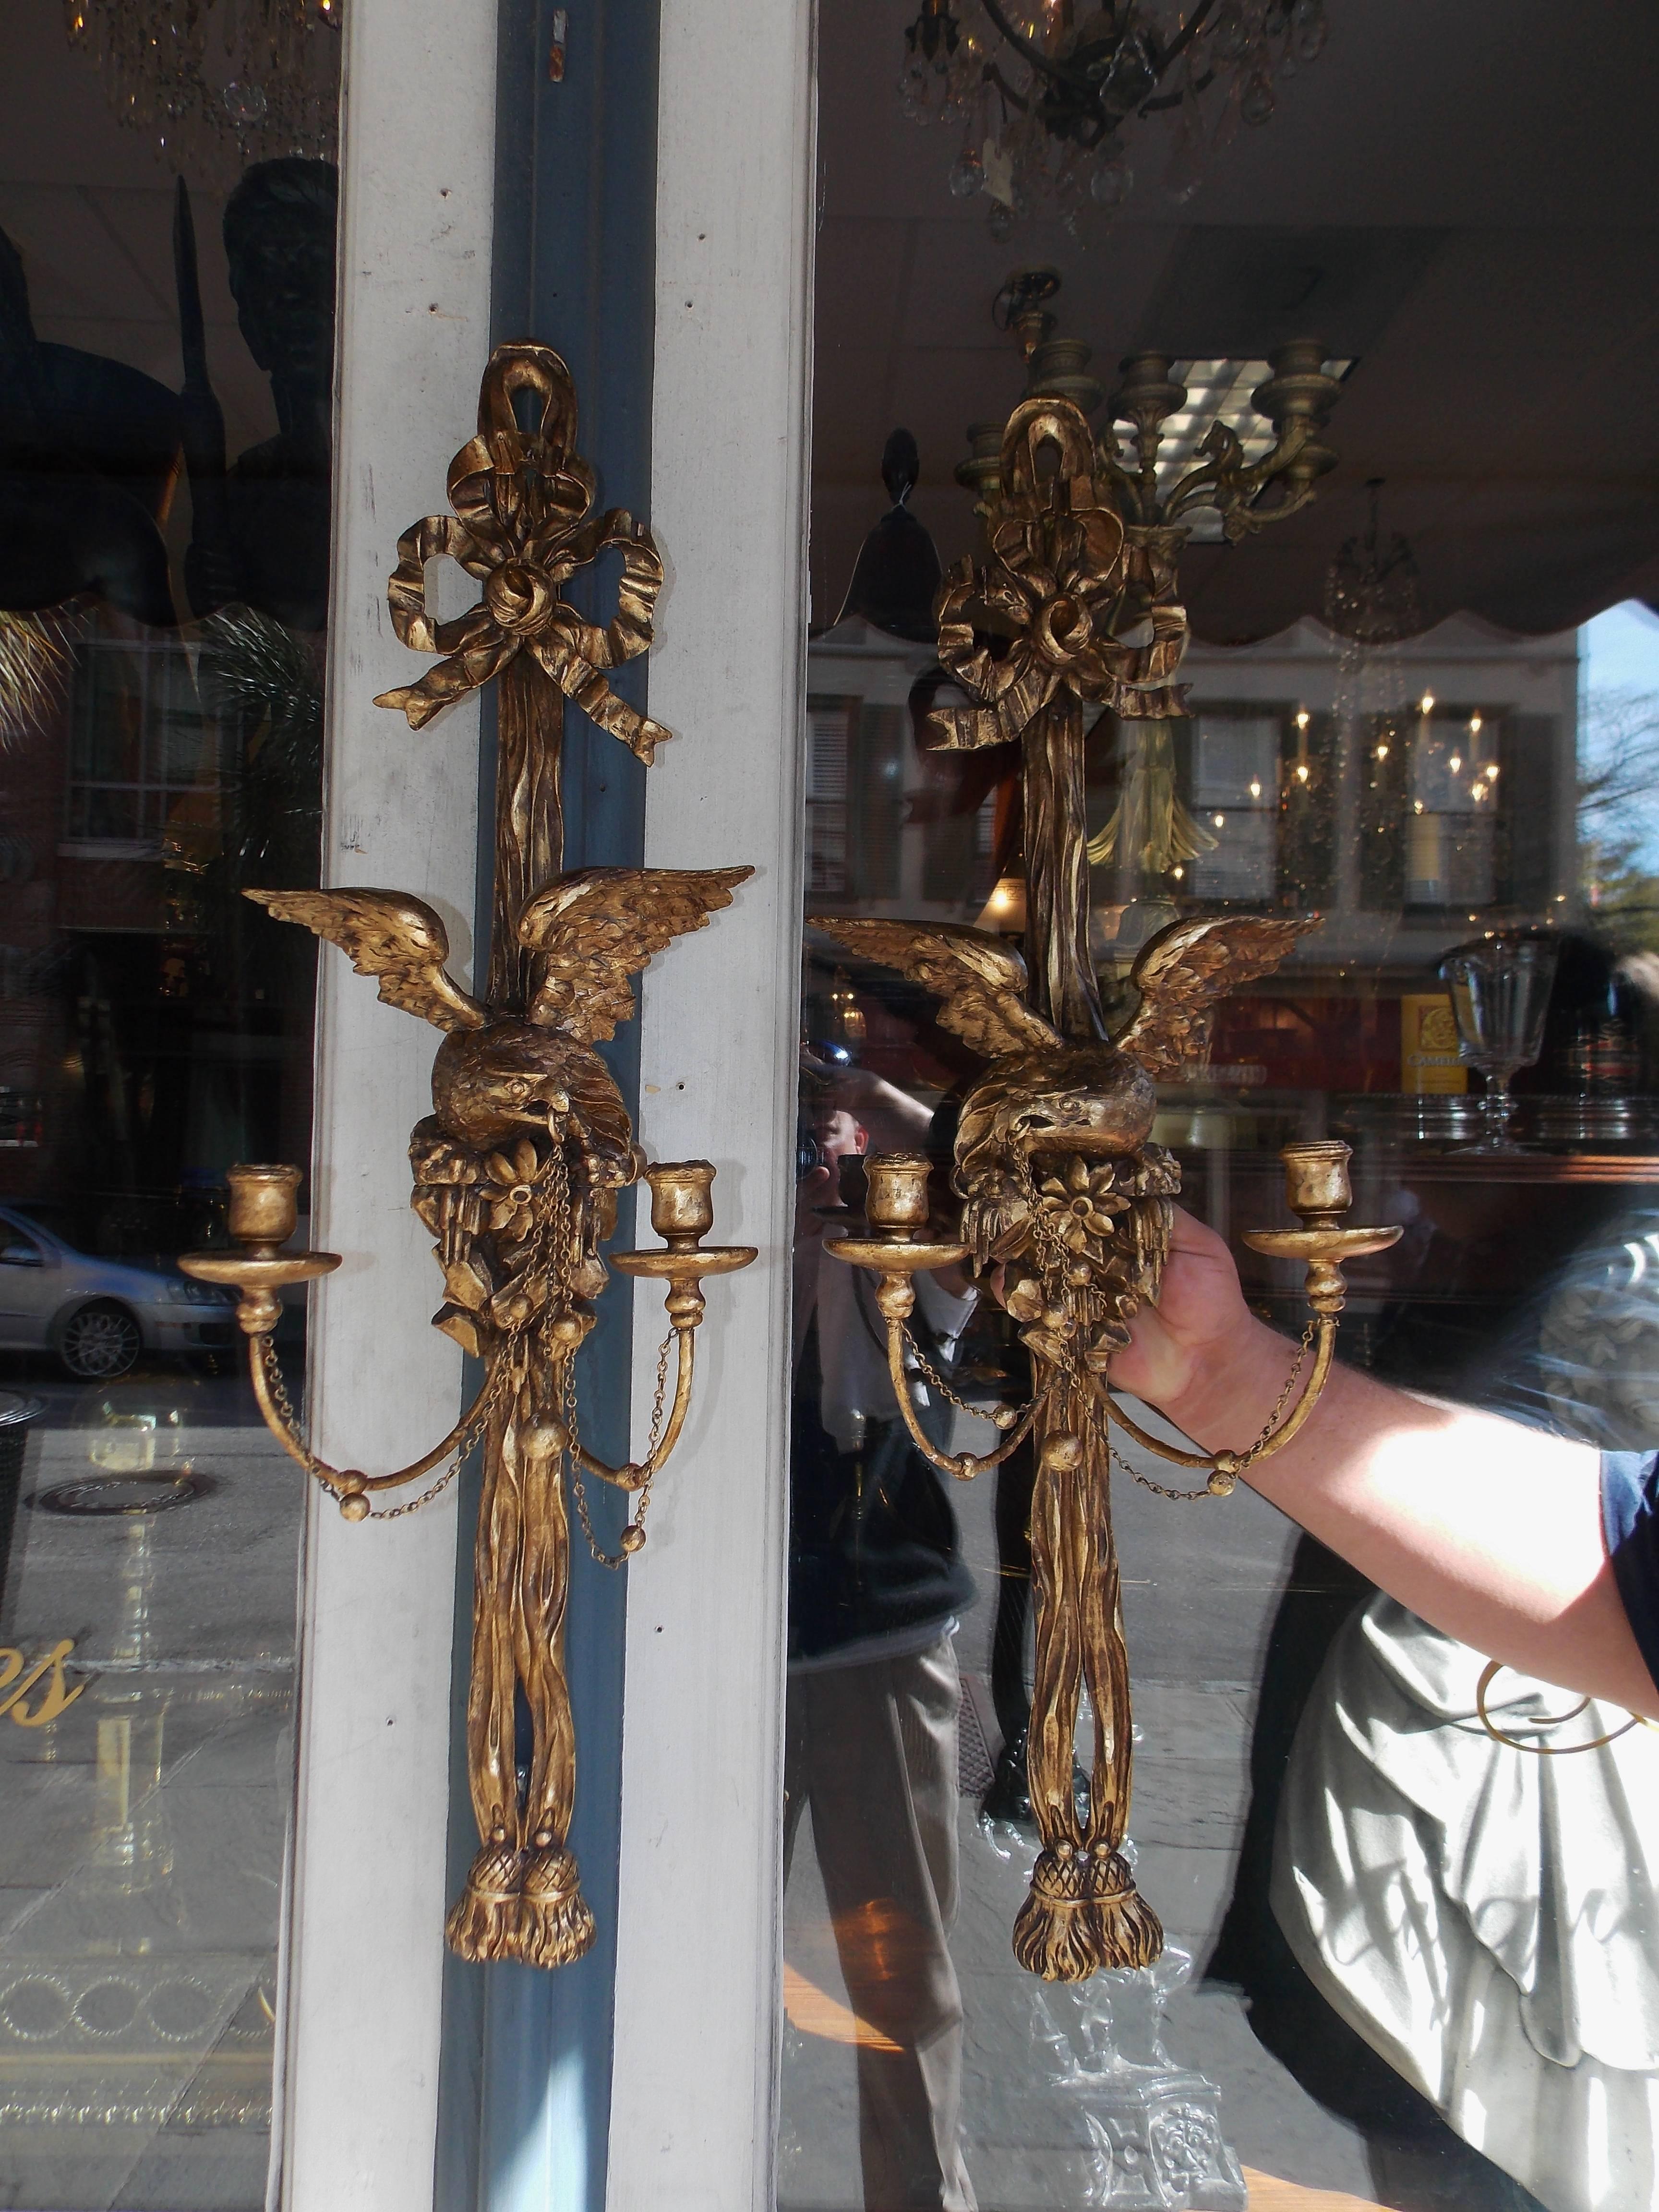 Pair of American gilt carved wood two-arm wall sconces with perched facing eagles to flee on rocky plinths, attached chain with circular spheres, flanking ribbon motif and terminating with a double lower tassel. Early 19th century. Sconces are